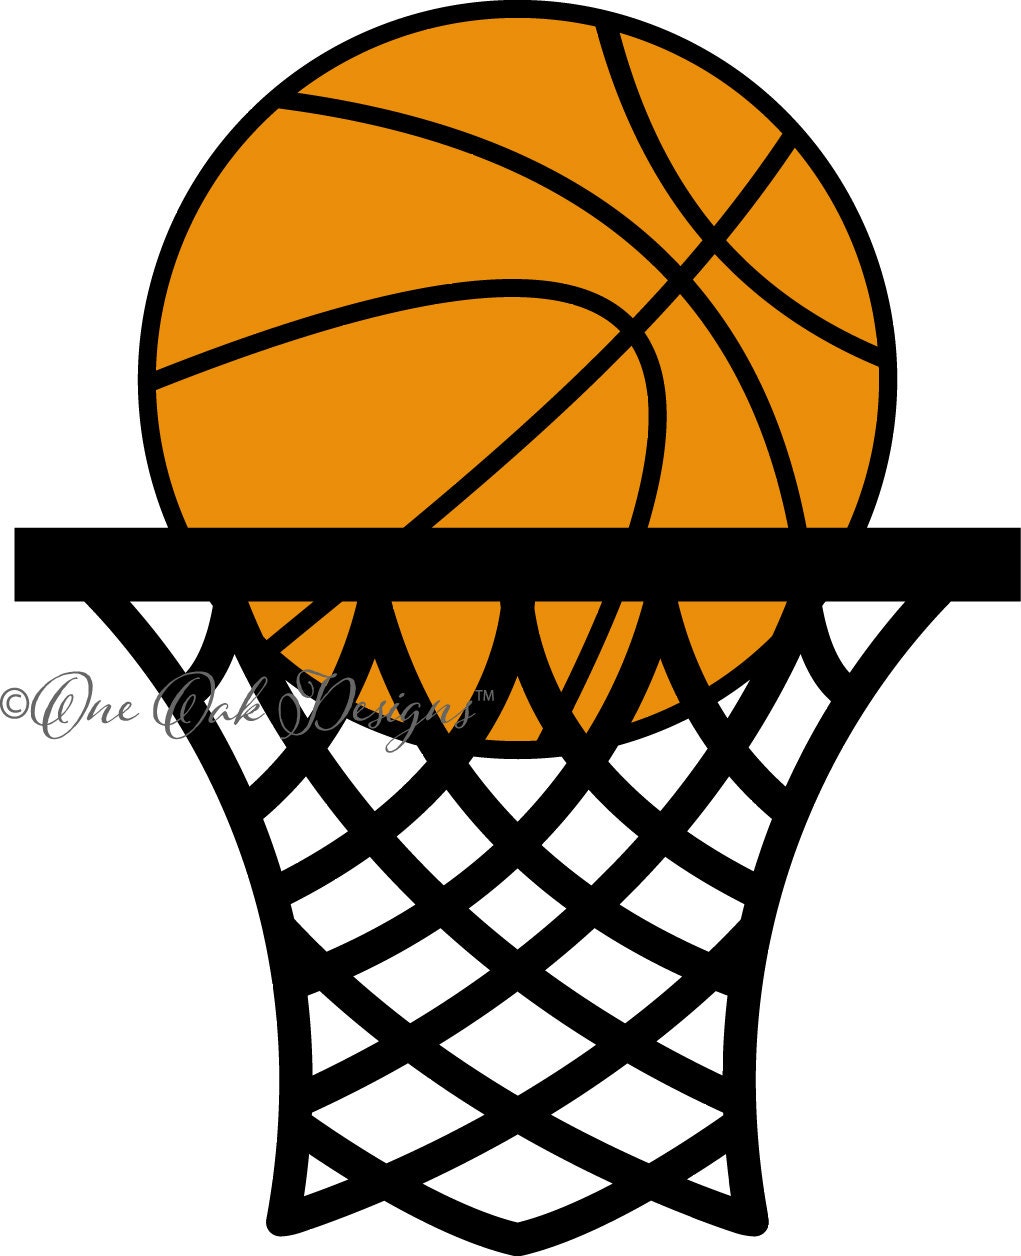 Download Basketball with Hoop SVG File PDF / dxf / jpg / png / eps / ai